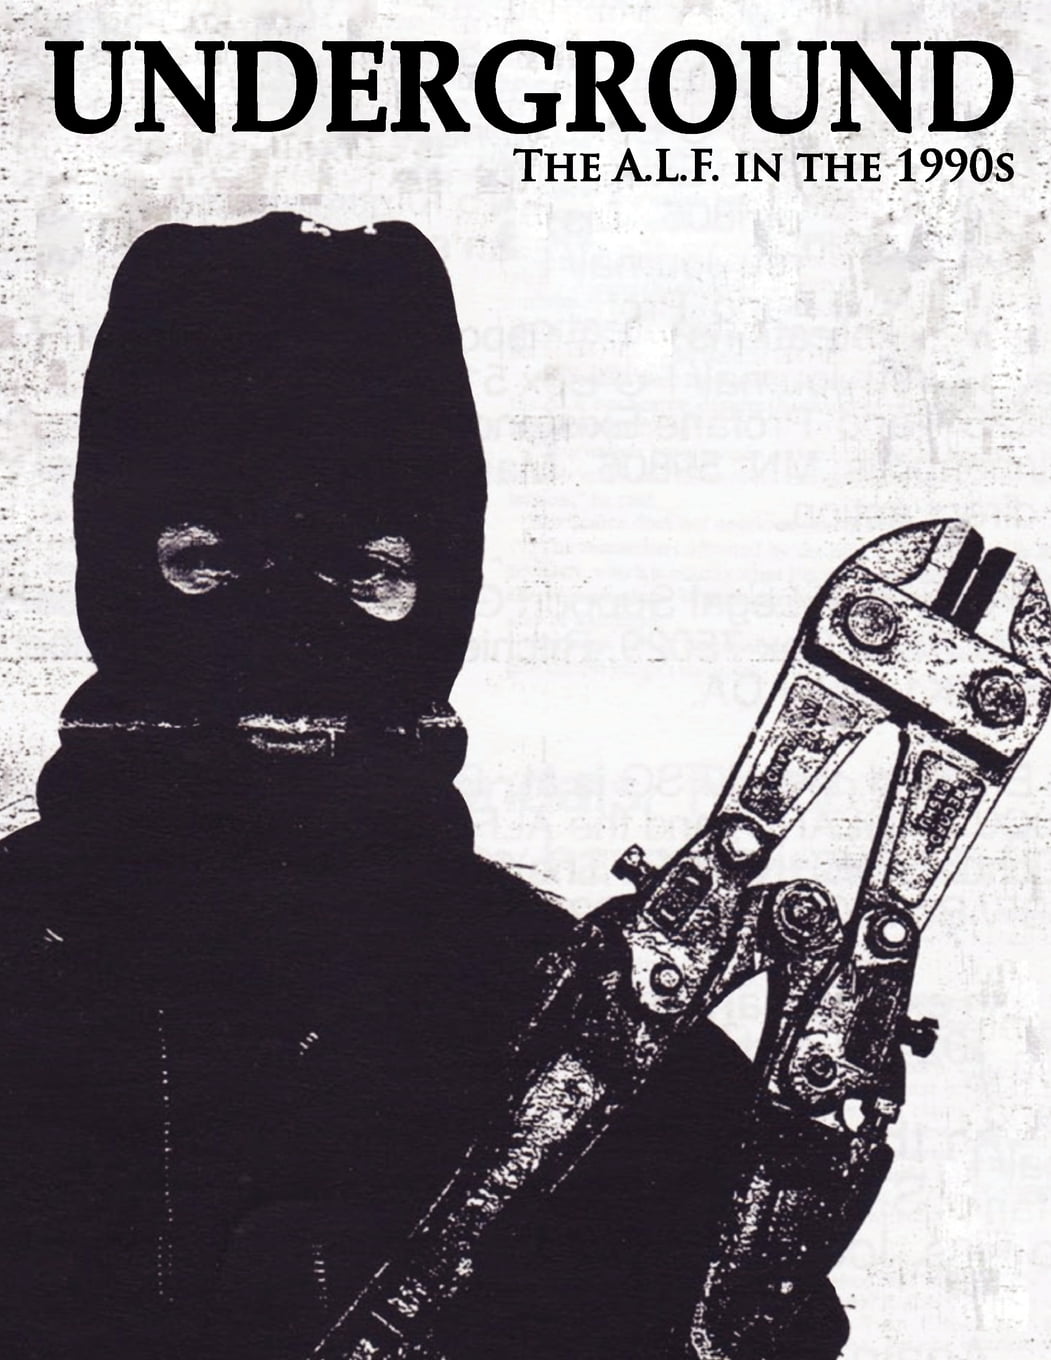 Underground: The Animal Liberation Front in the 1990s, Collected Issues